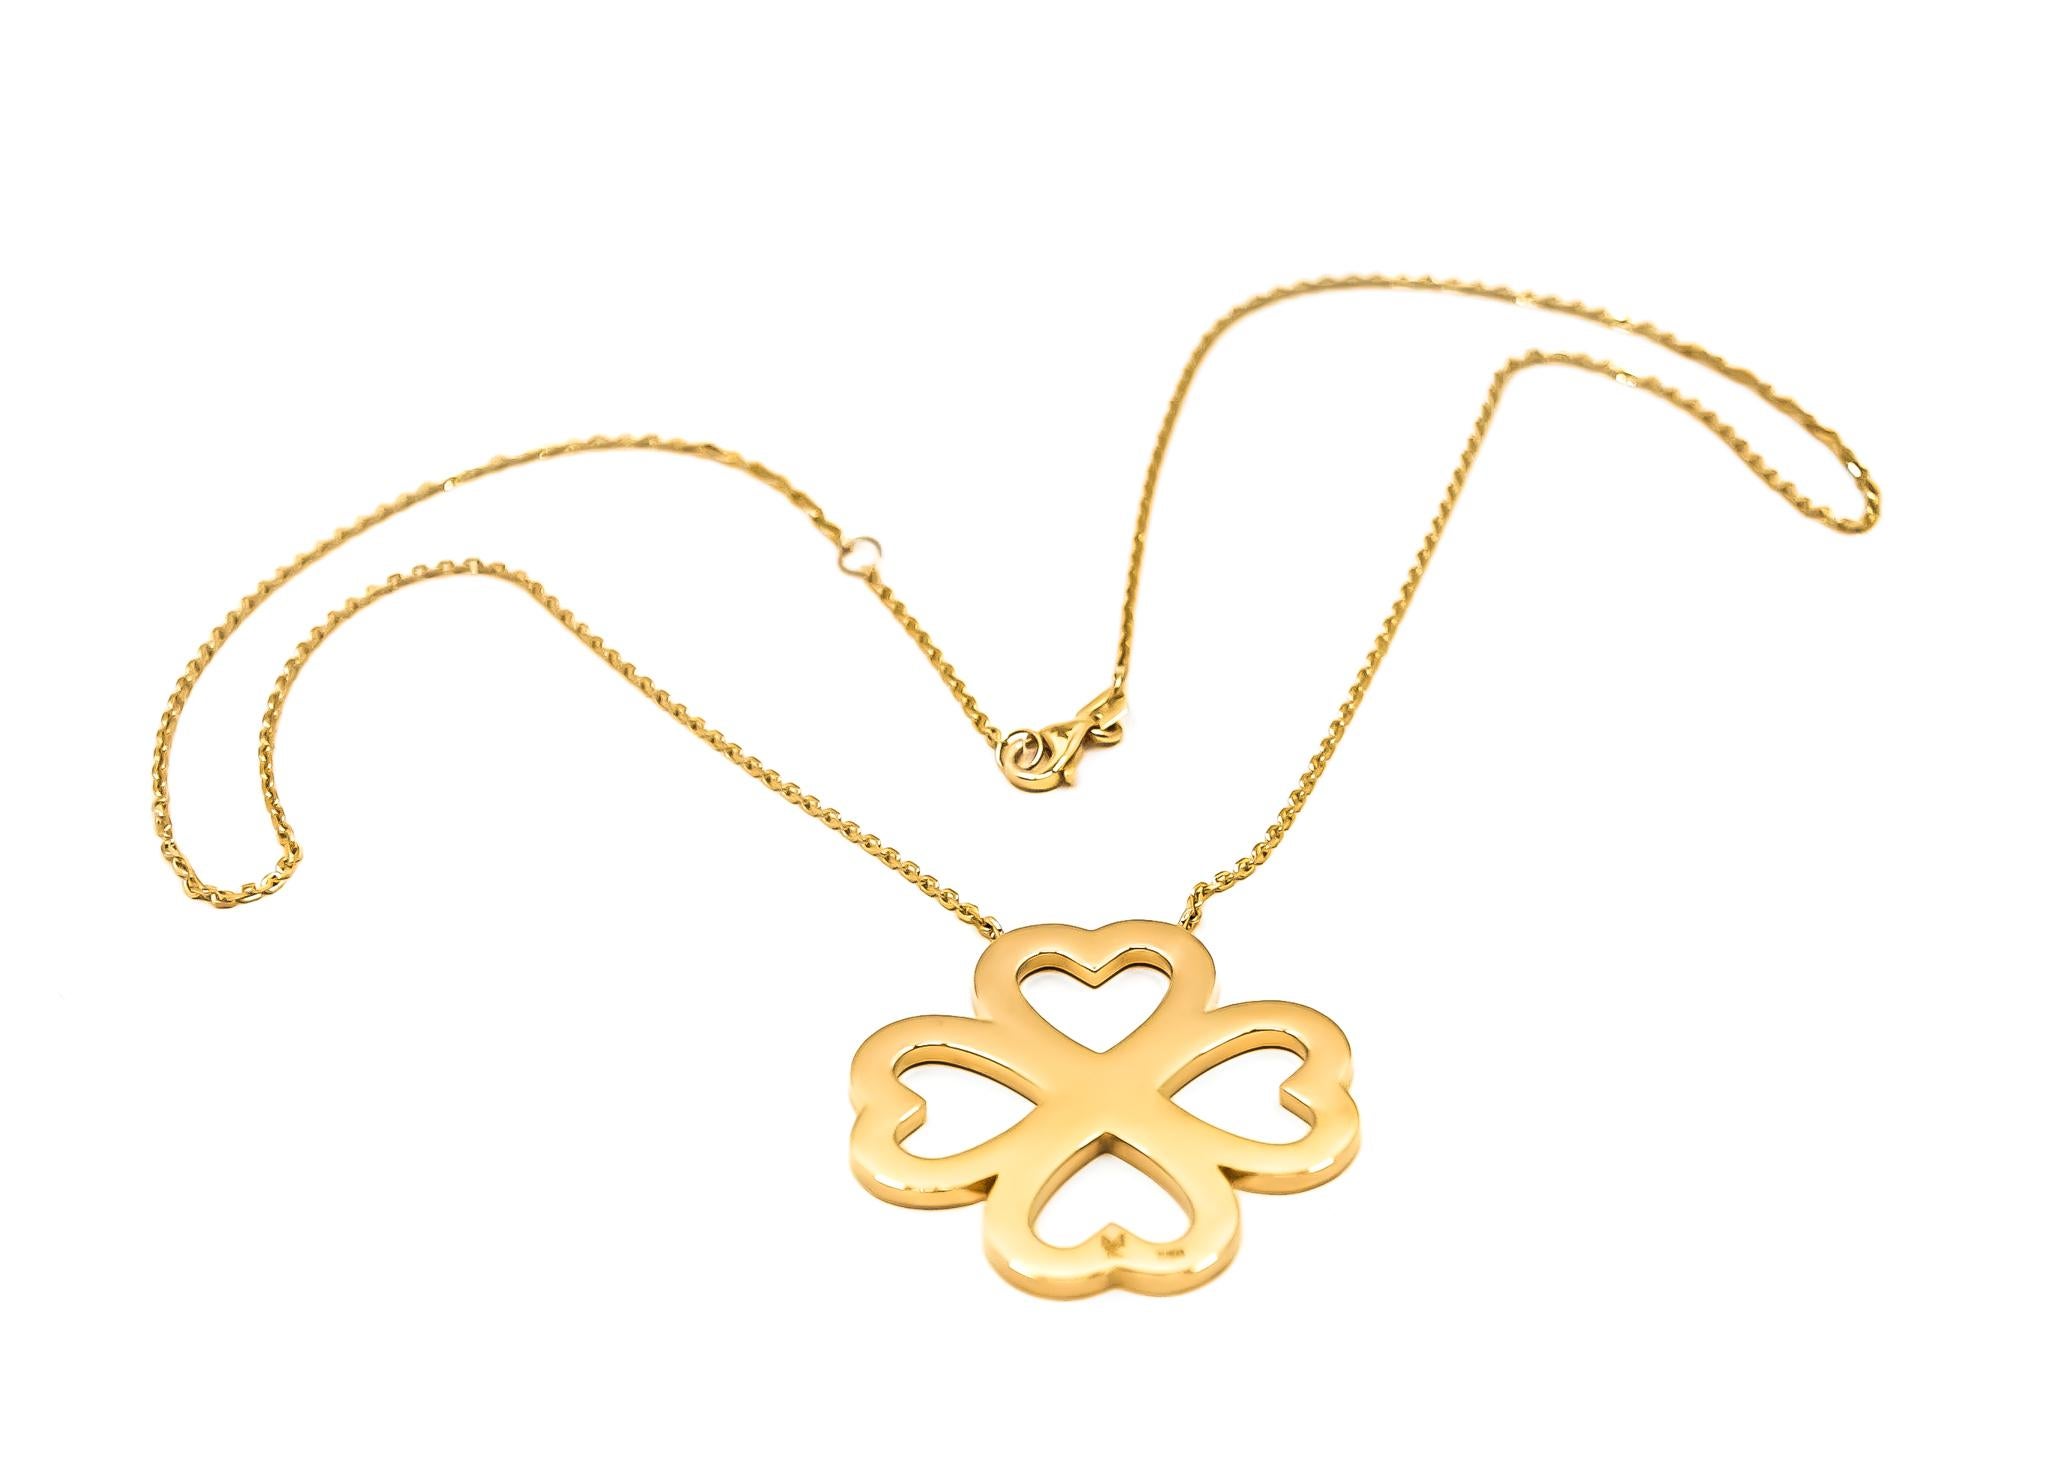 Women's Heart Blossom Pendant Necklace in 18kt Gold For Sale